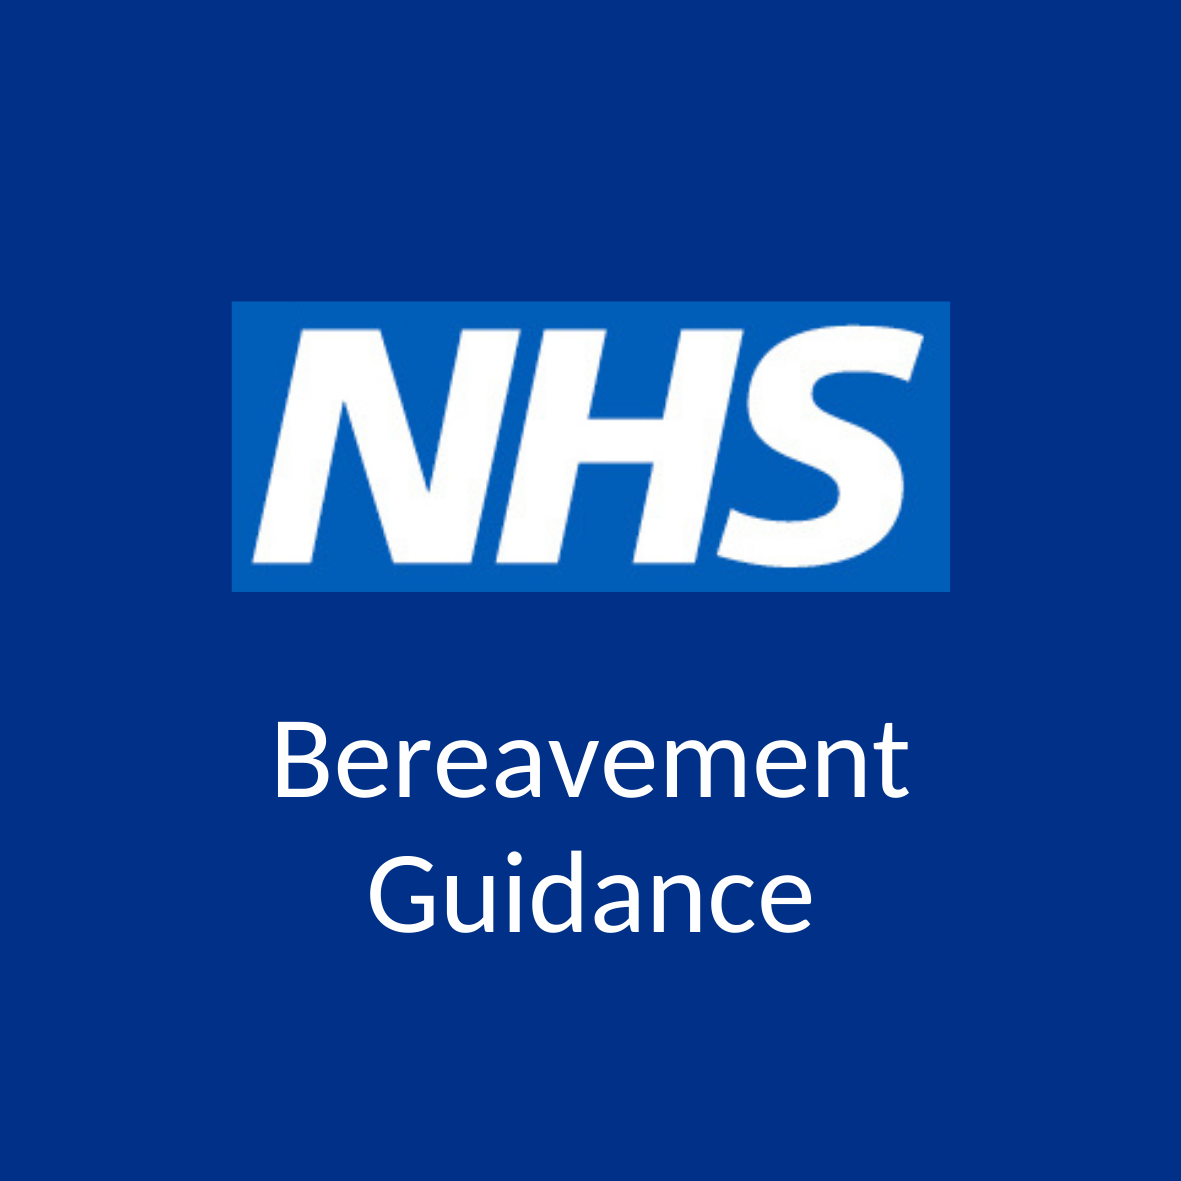 Image of NHS Logo and Words 'Bereavement Guidance'